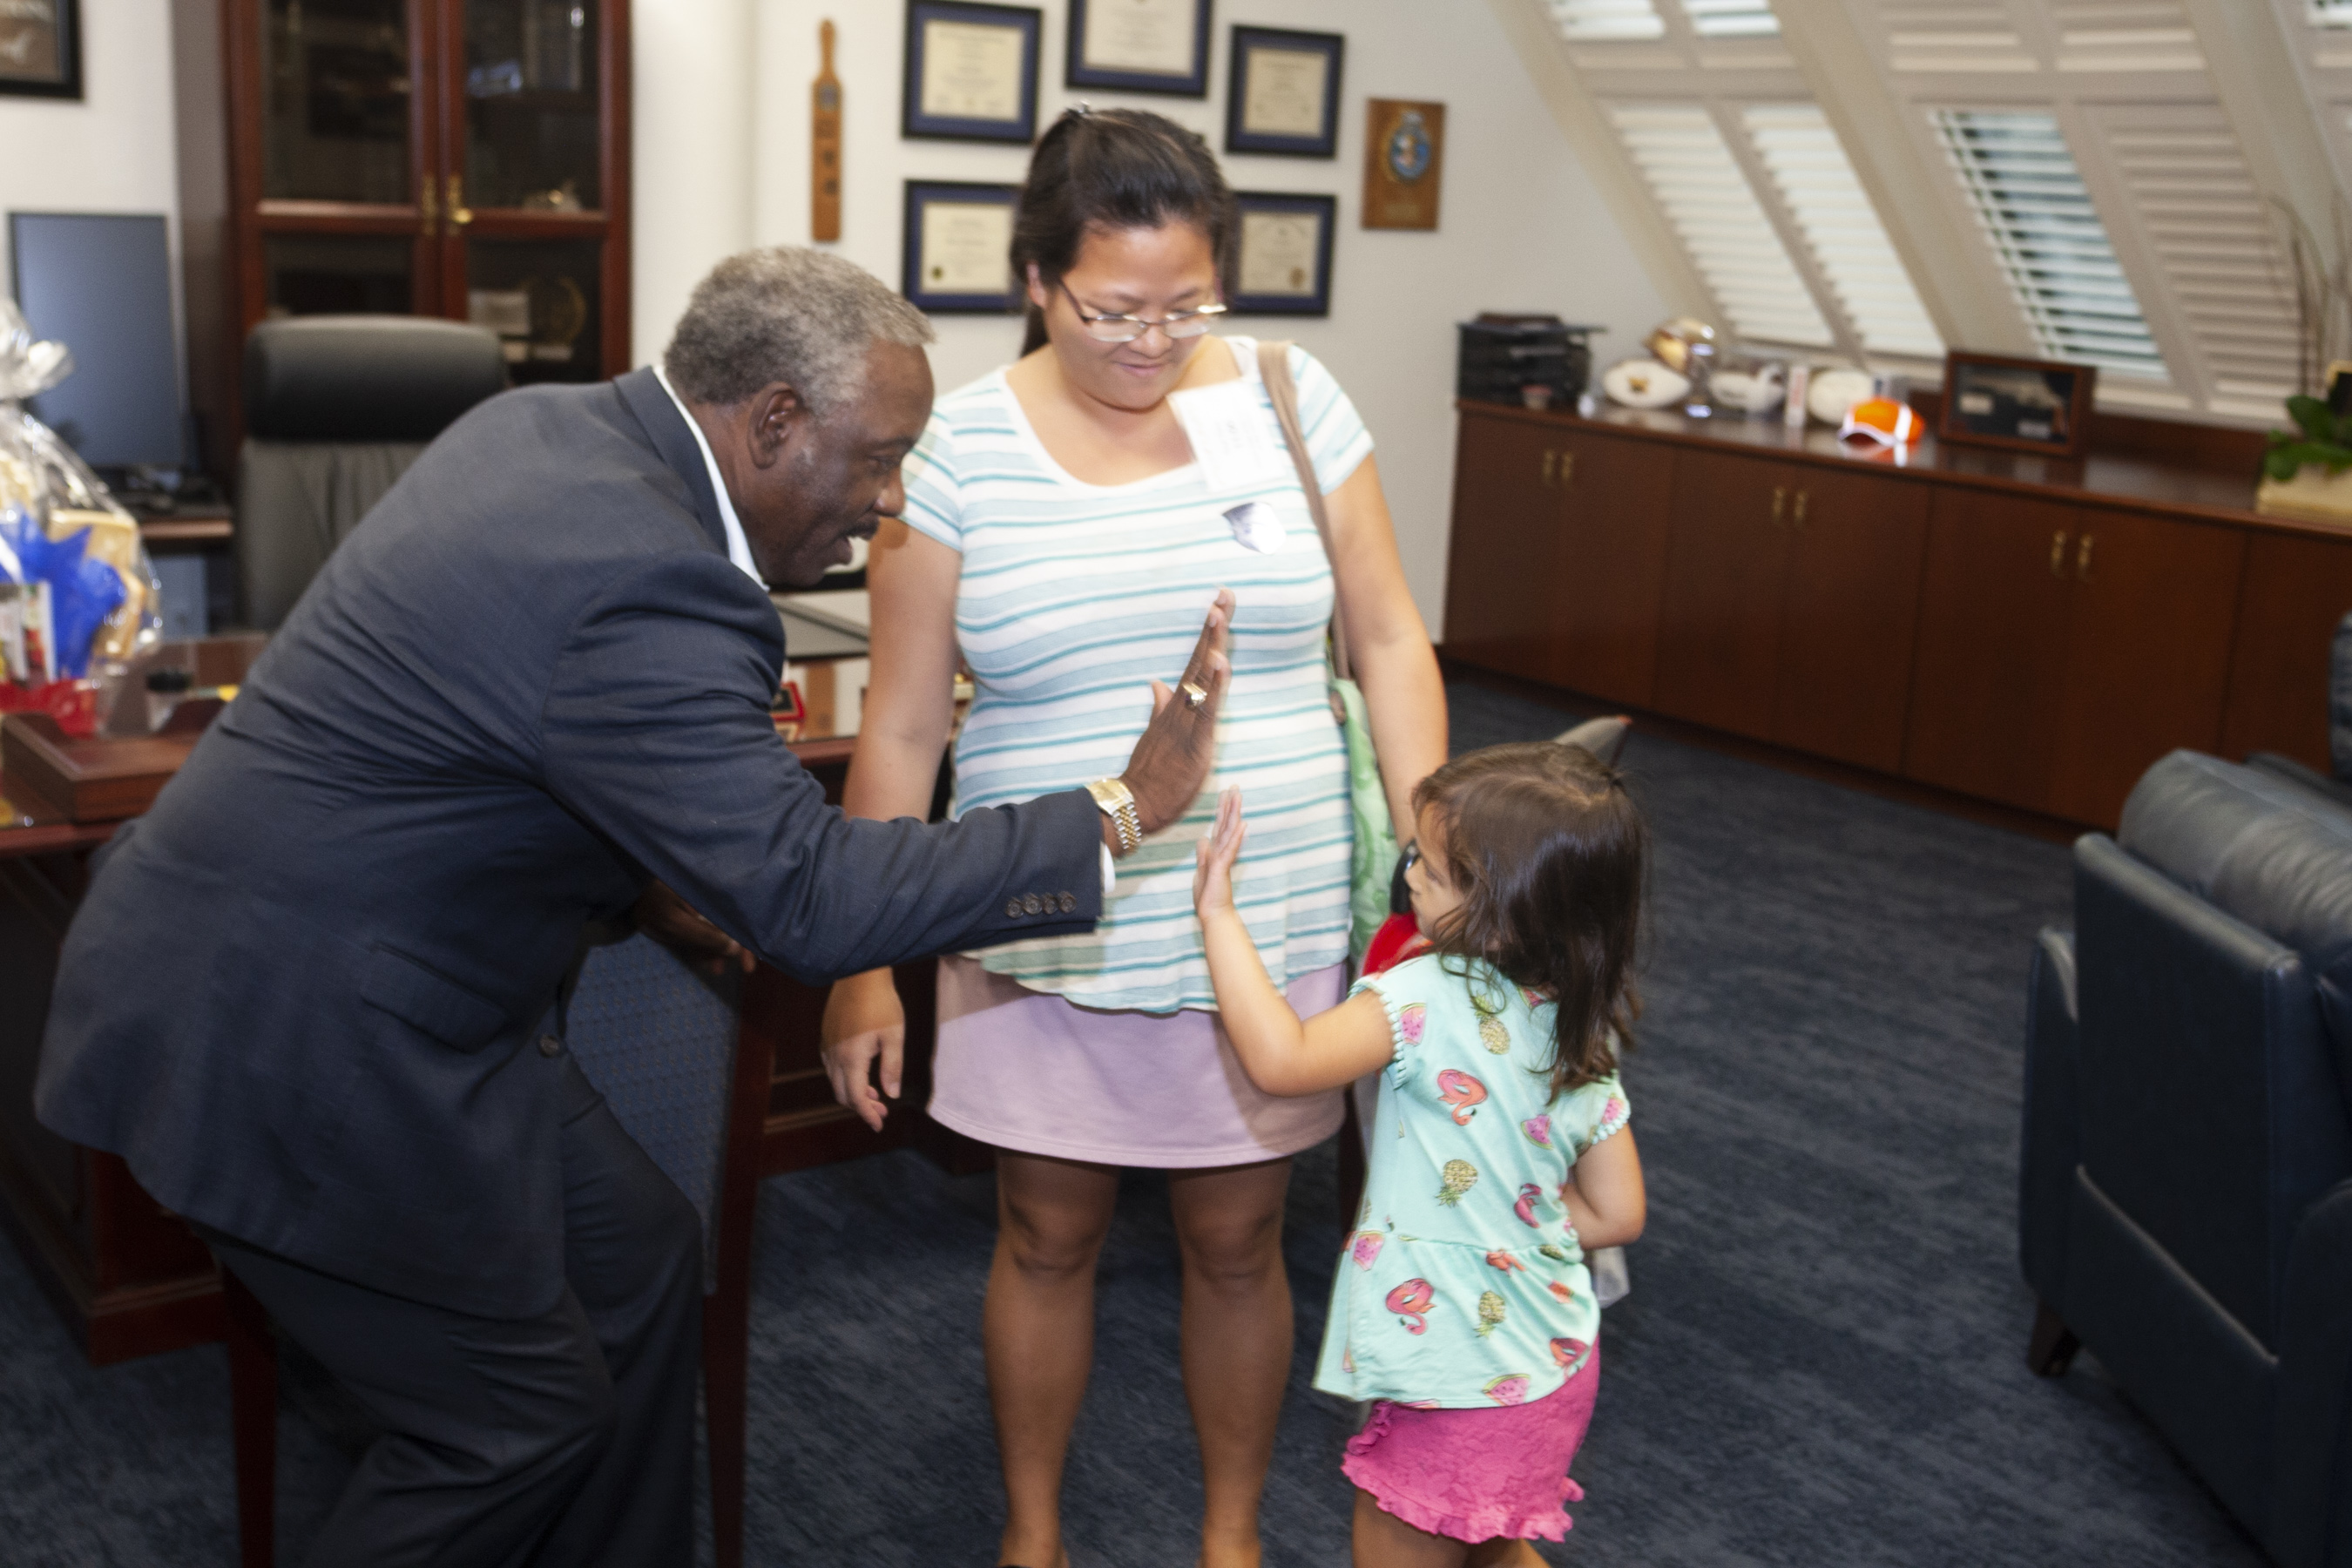 Mayor Demings giving a high-five to a little girl while her mother stands beside them. They are in the Mayor's office.